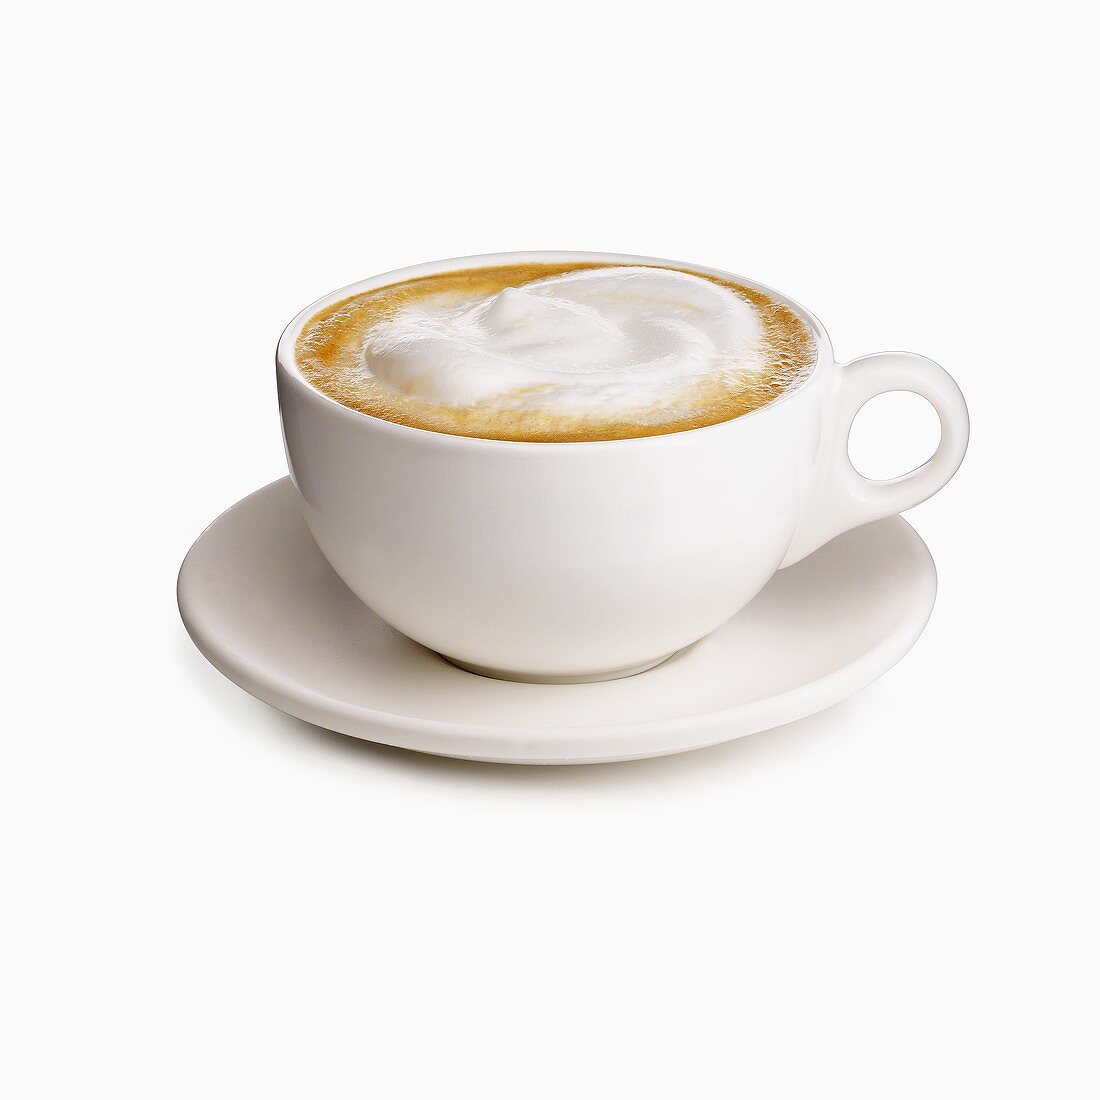 Cappuccino in a White Mug on a Saucer, White Background